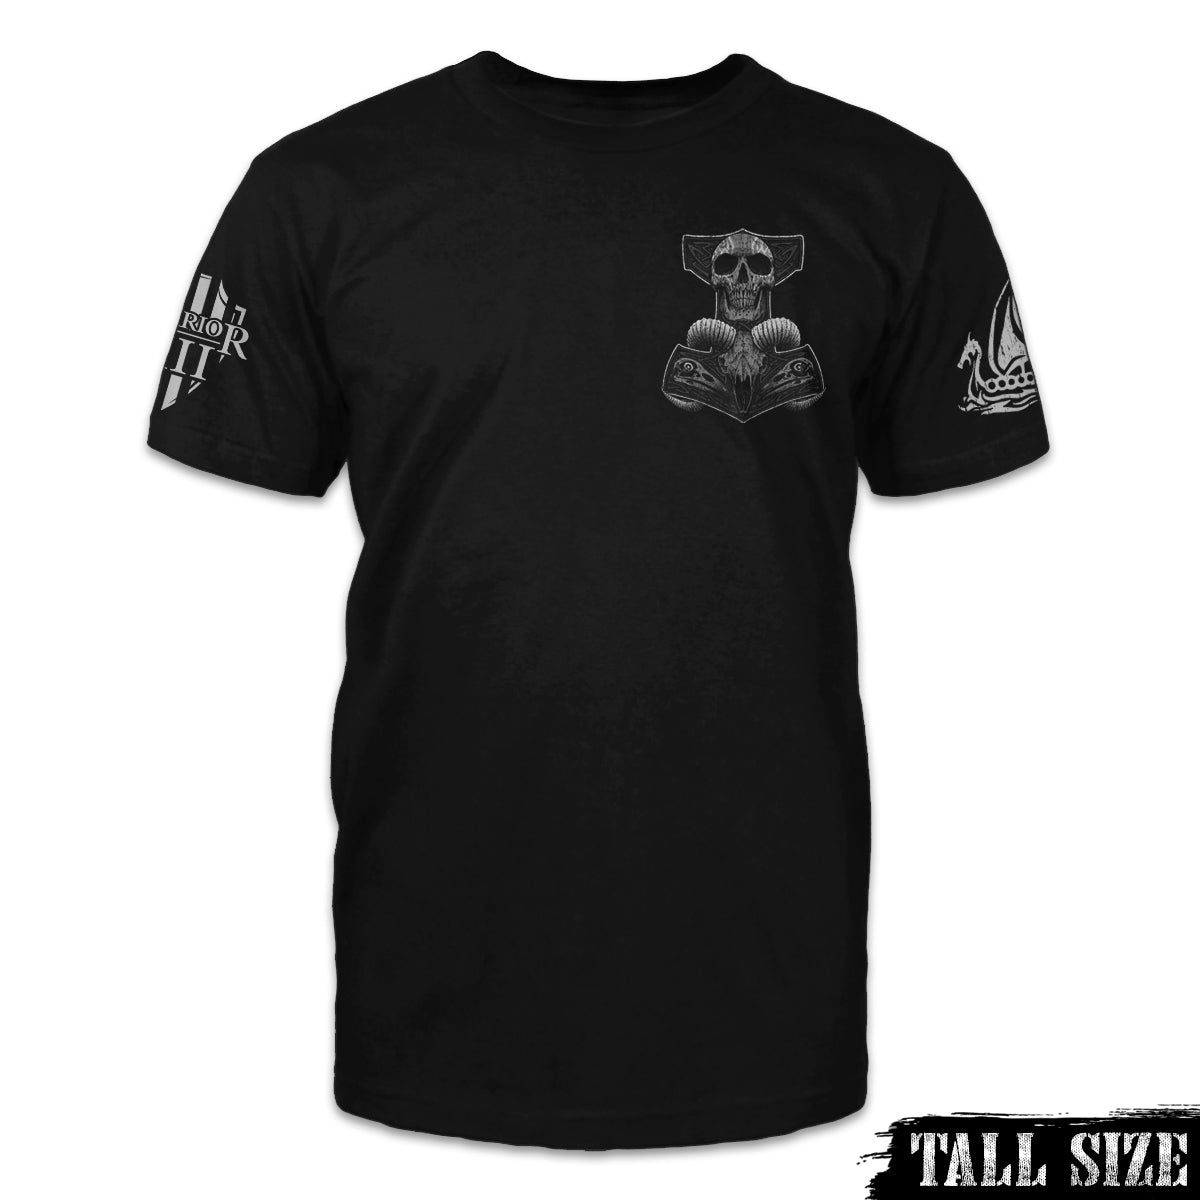 A black tall size shirt features a Thor's hammer skull design. The ram skull symbolizes the rams that pulled Thor's chariot printed n the front left chest.